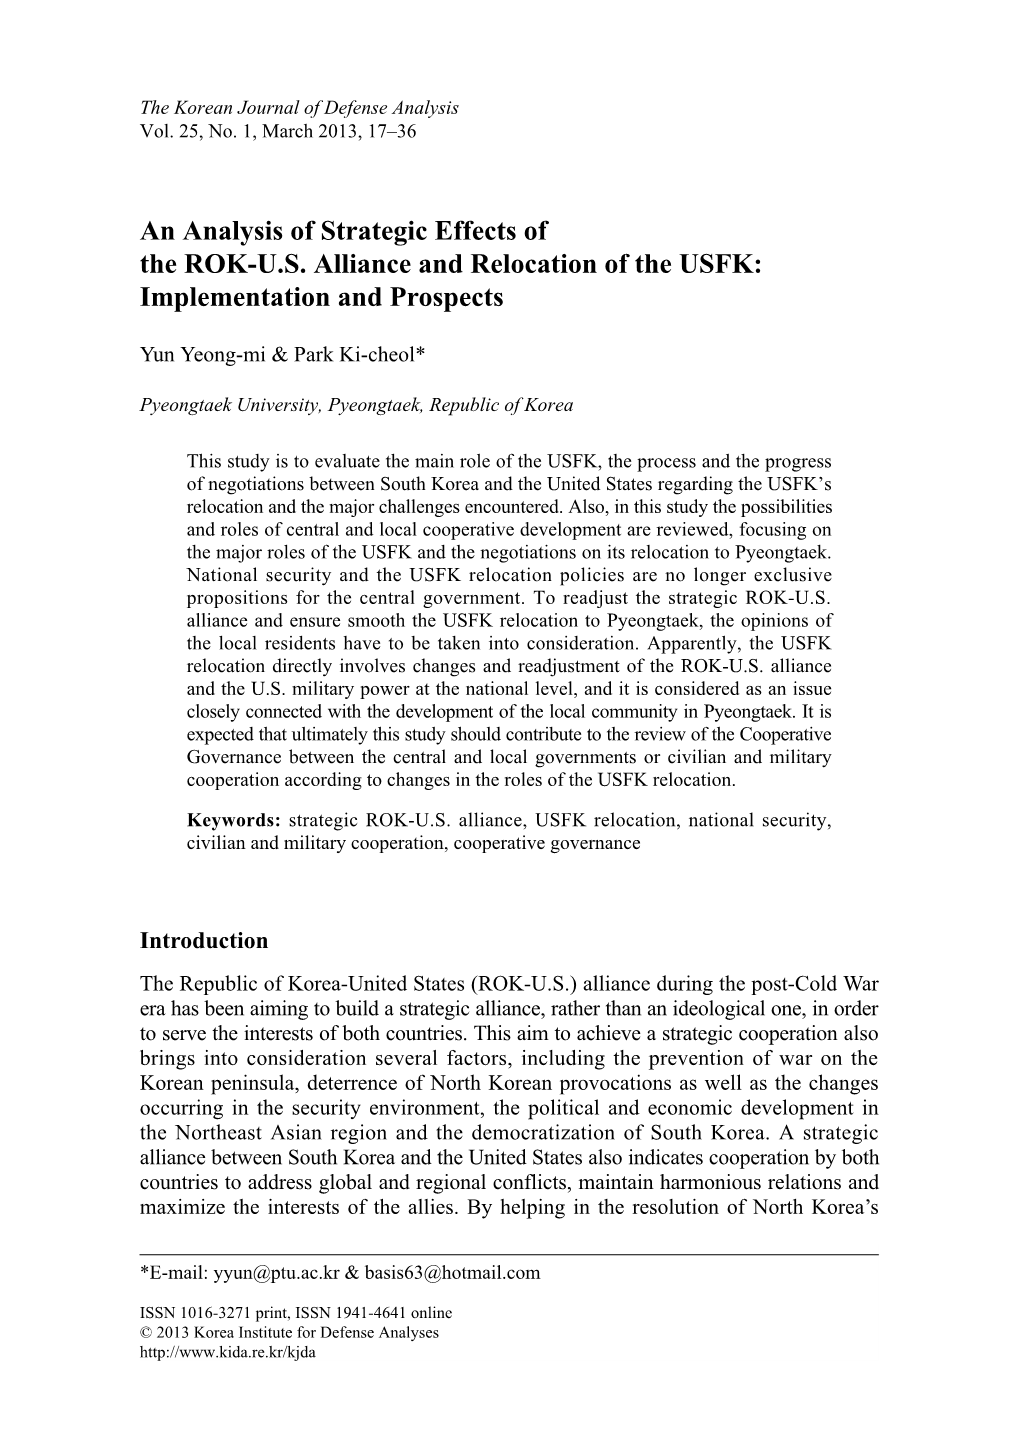 An Analysis of Strategic Effects of the ROK-U.S. Alliance and Relocation of the USFK: Implementation and Prospects